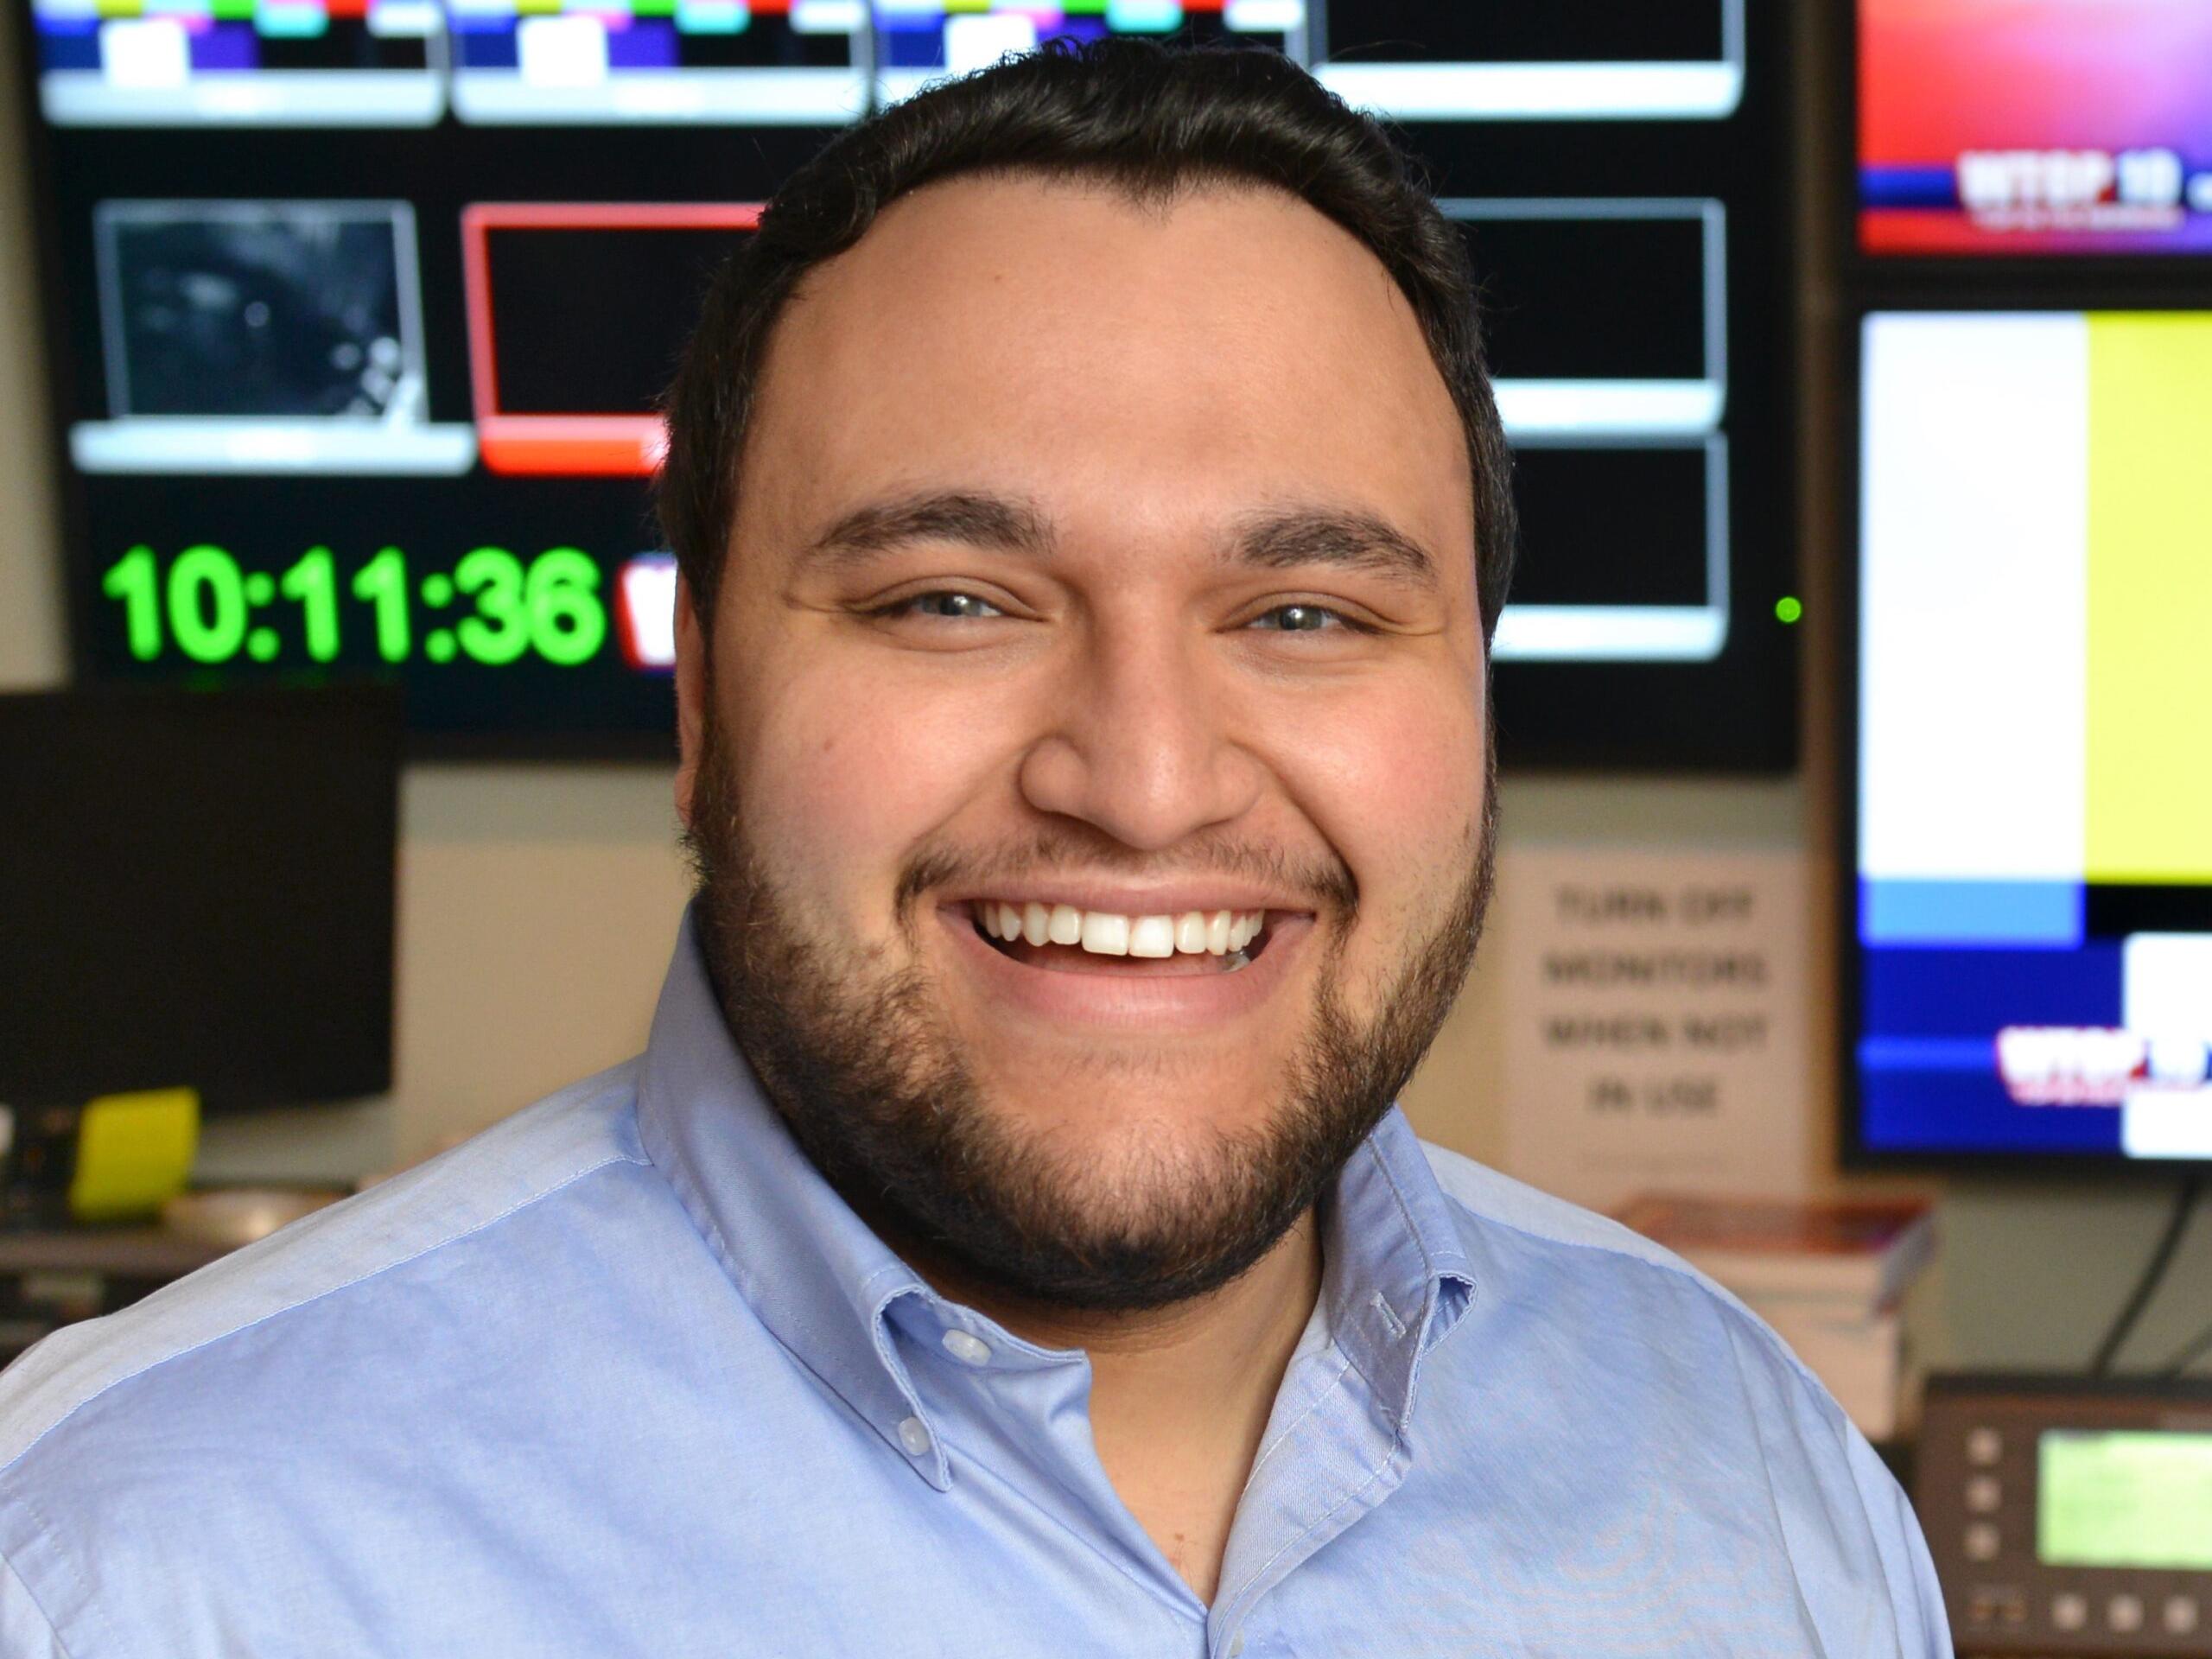 Justin Dobrow, a 2017 SUNY Oswego graduate and supervisor of program operations at NBCUniversal supporting Peacock, will serve as media summit moderator.